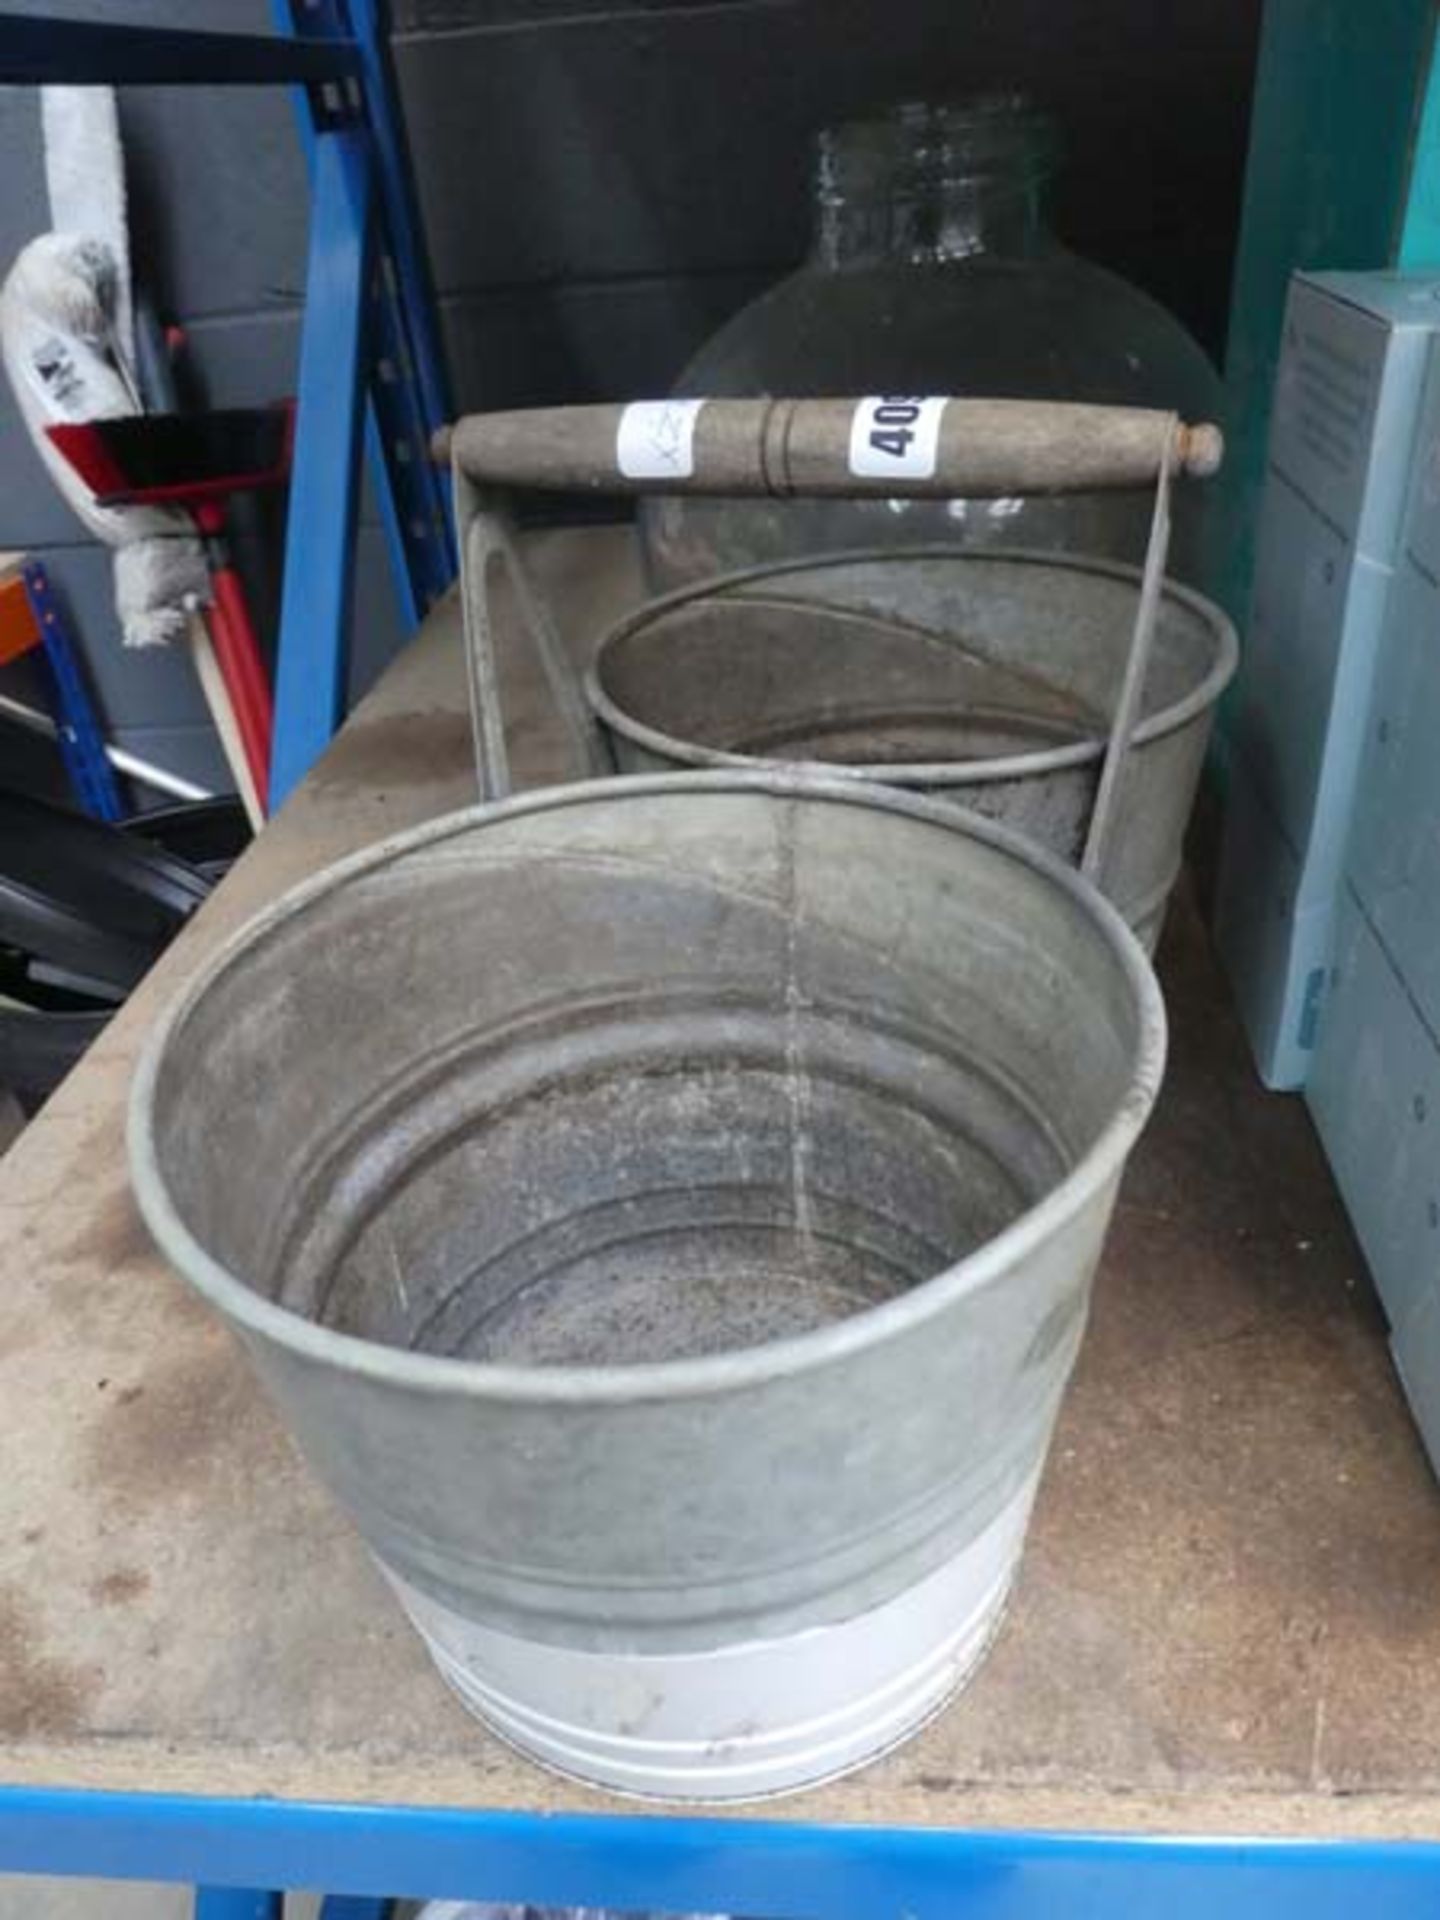 2 galvanized pots with a handle and a glass planter